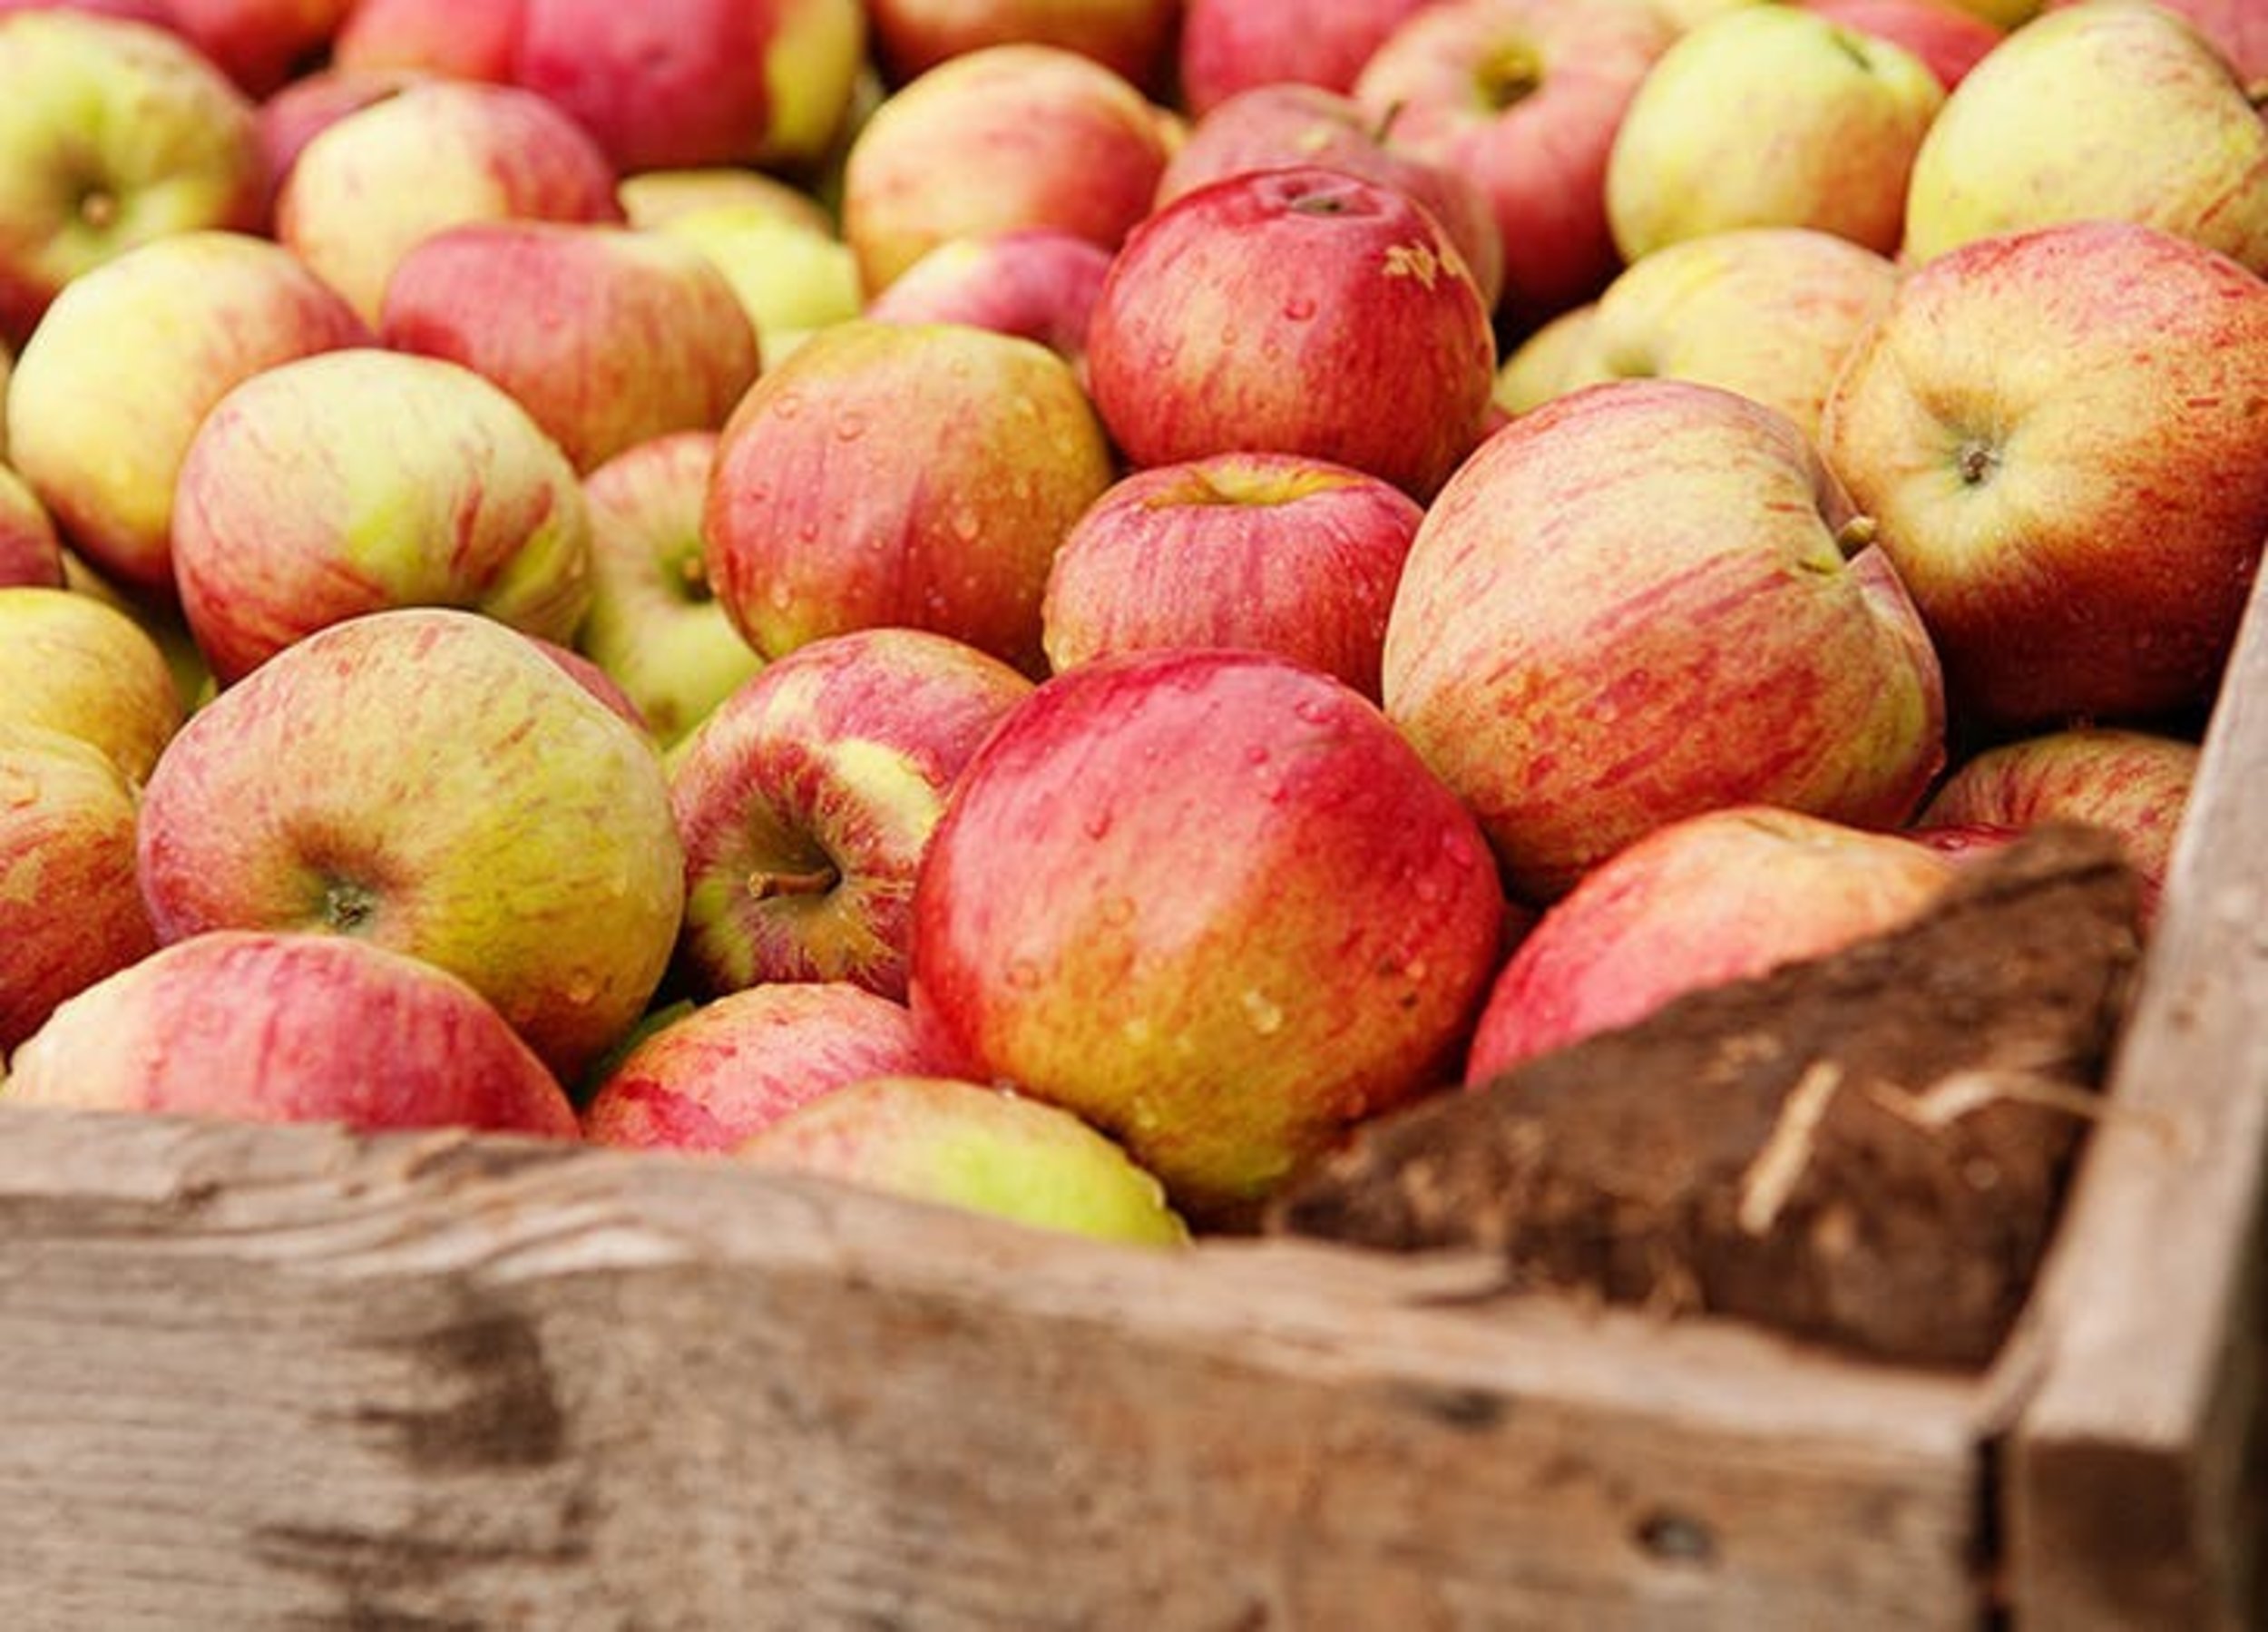 12 Types of Apples For Baking & Snacking